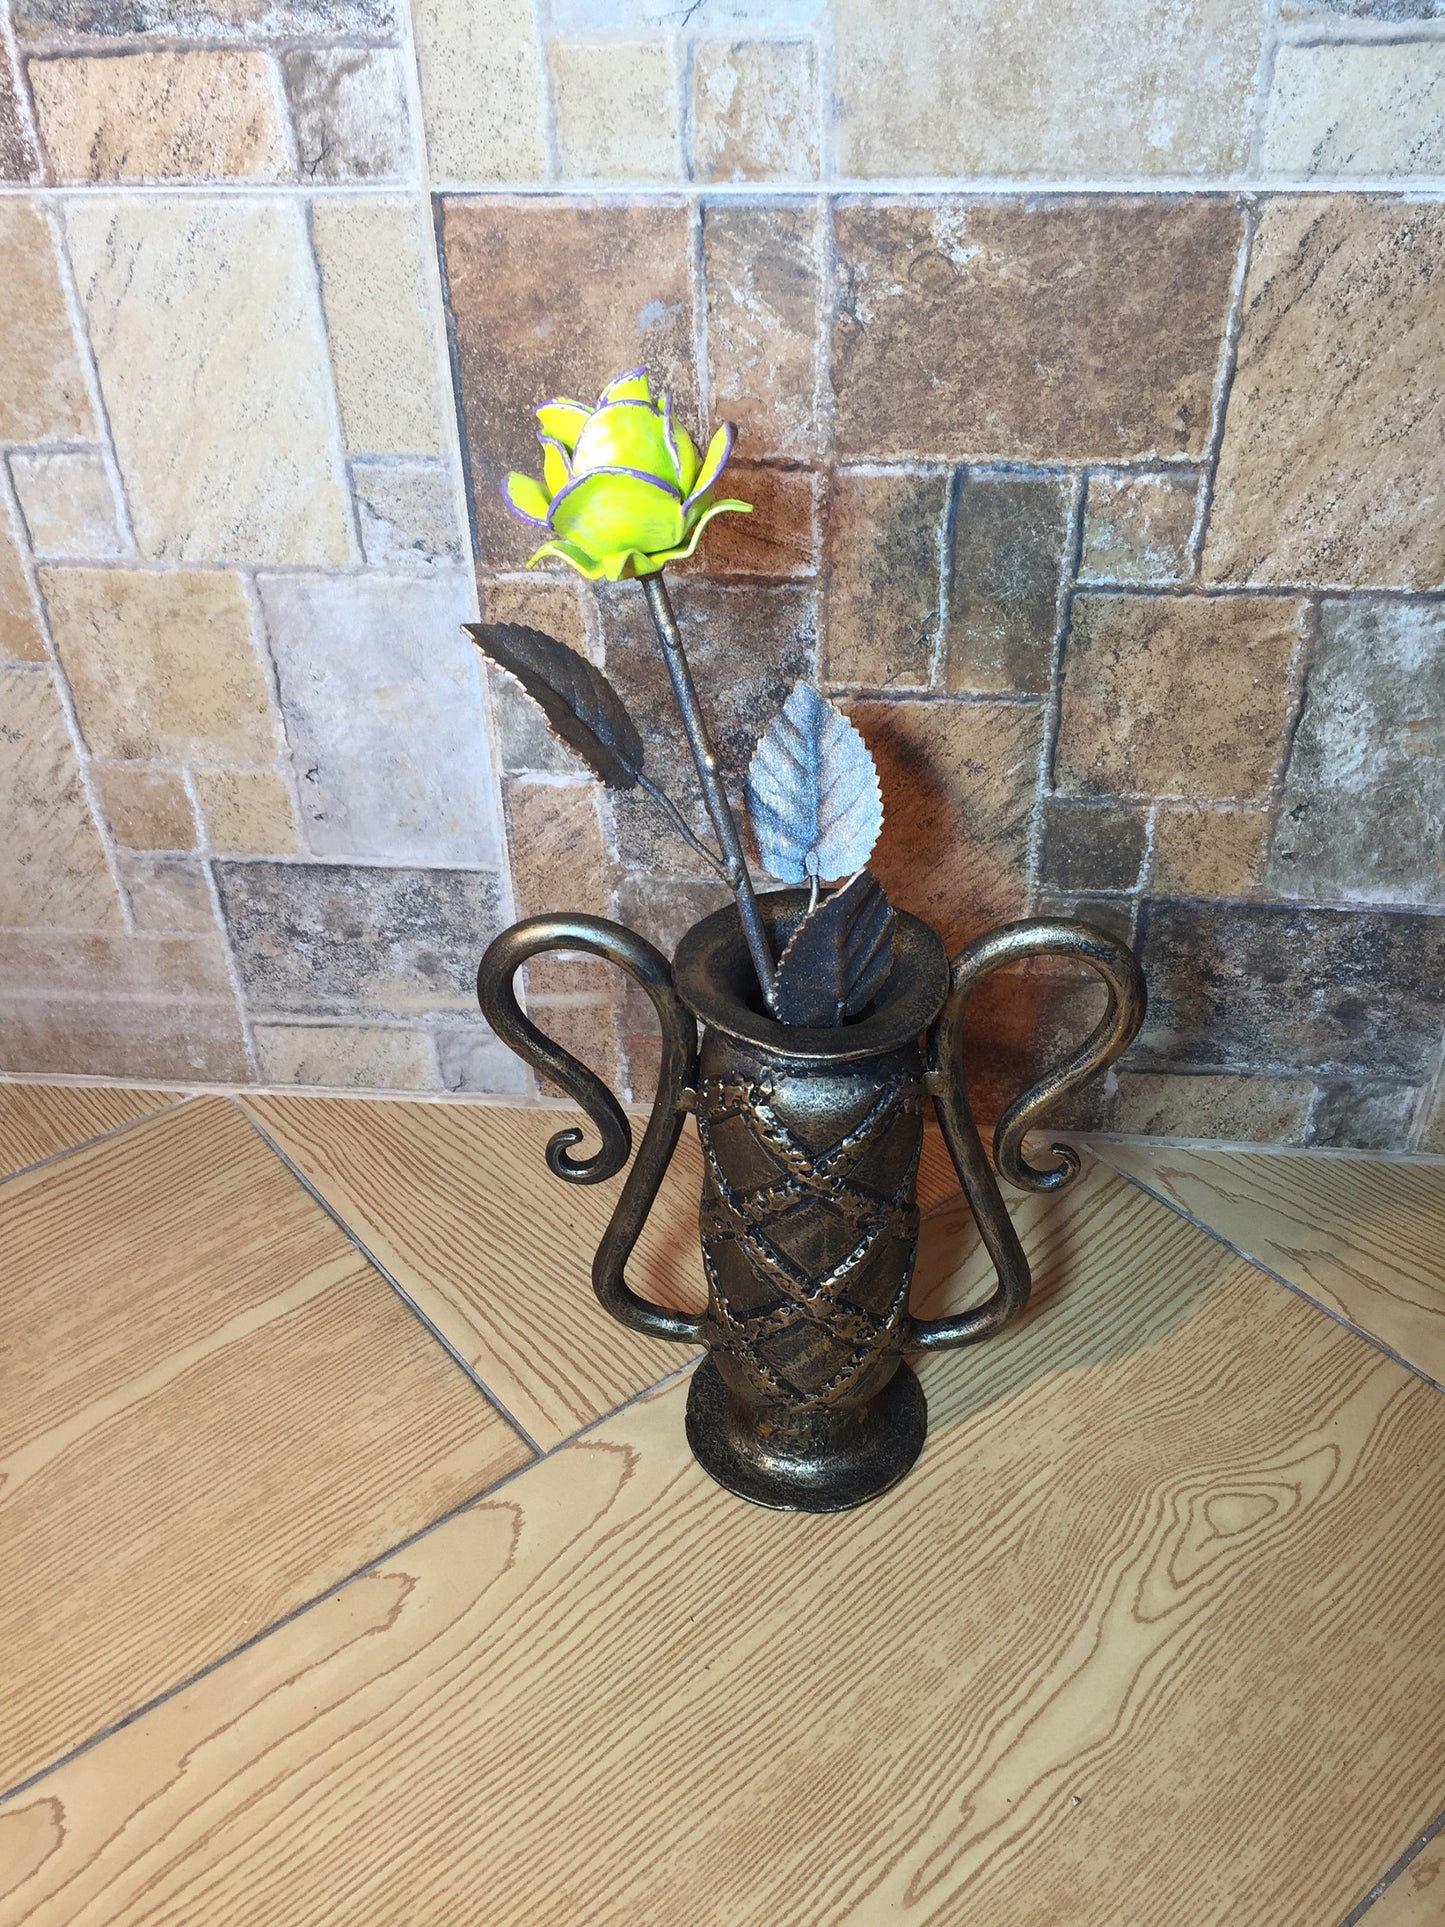 Iron rose in a vase, 6th anniversary gift, iron gifts for her,iron anniversary,hand forged rose,metal sculpture,metal rose,iron gift for her